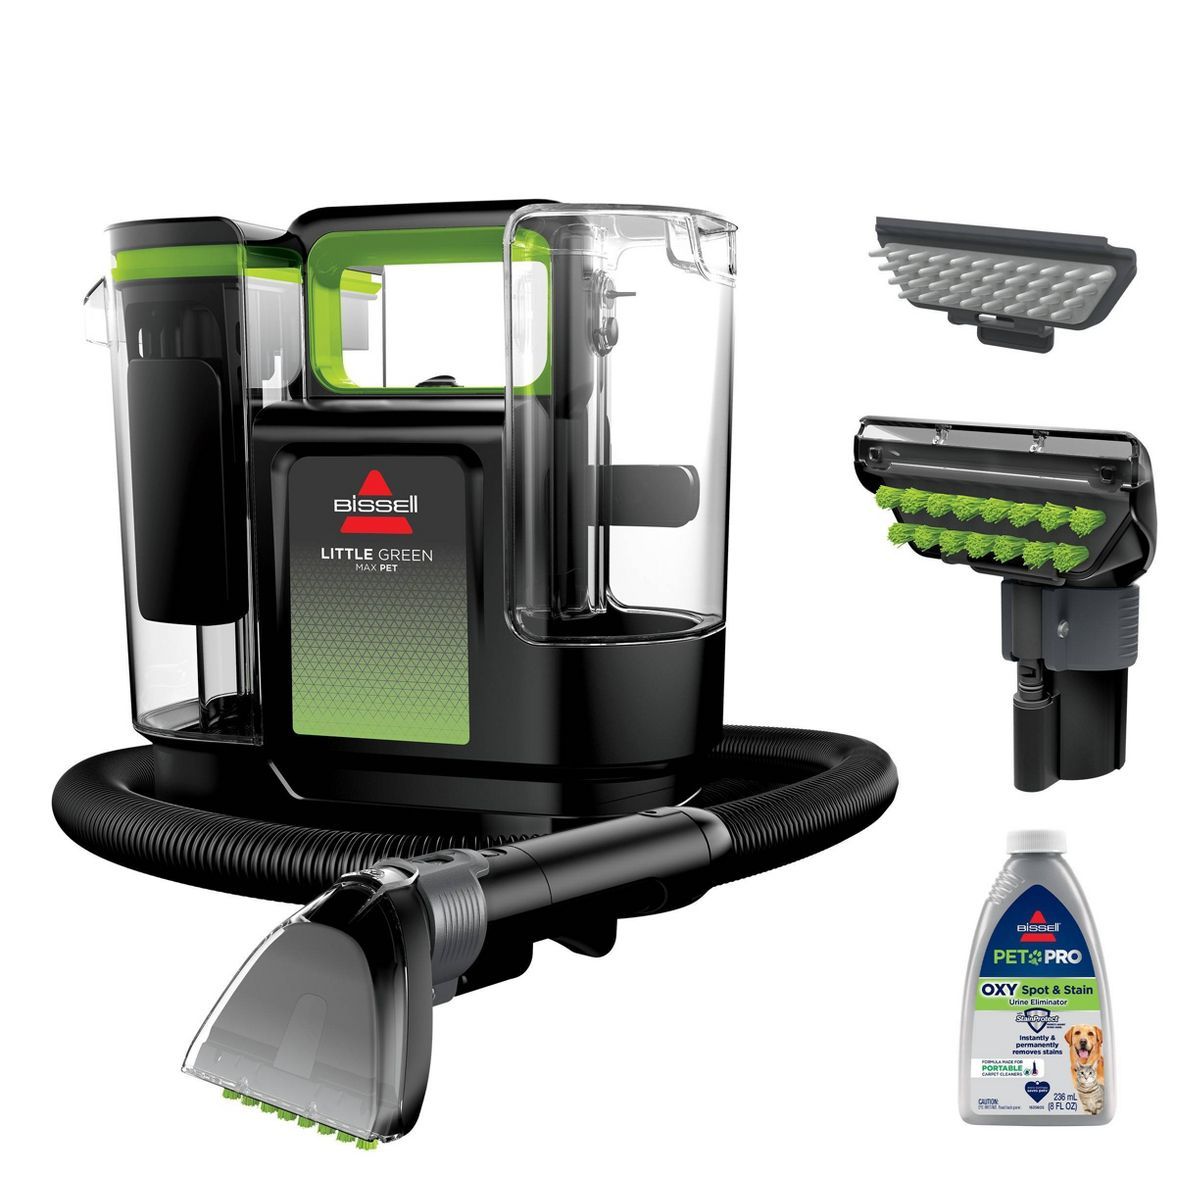 BISSELL Little Green Max Pet Portable Carpet Cleaner | Target